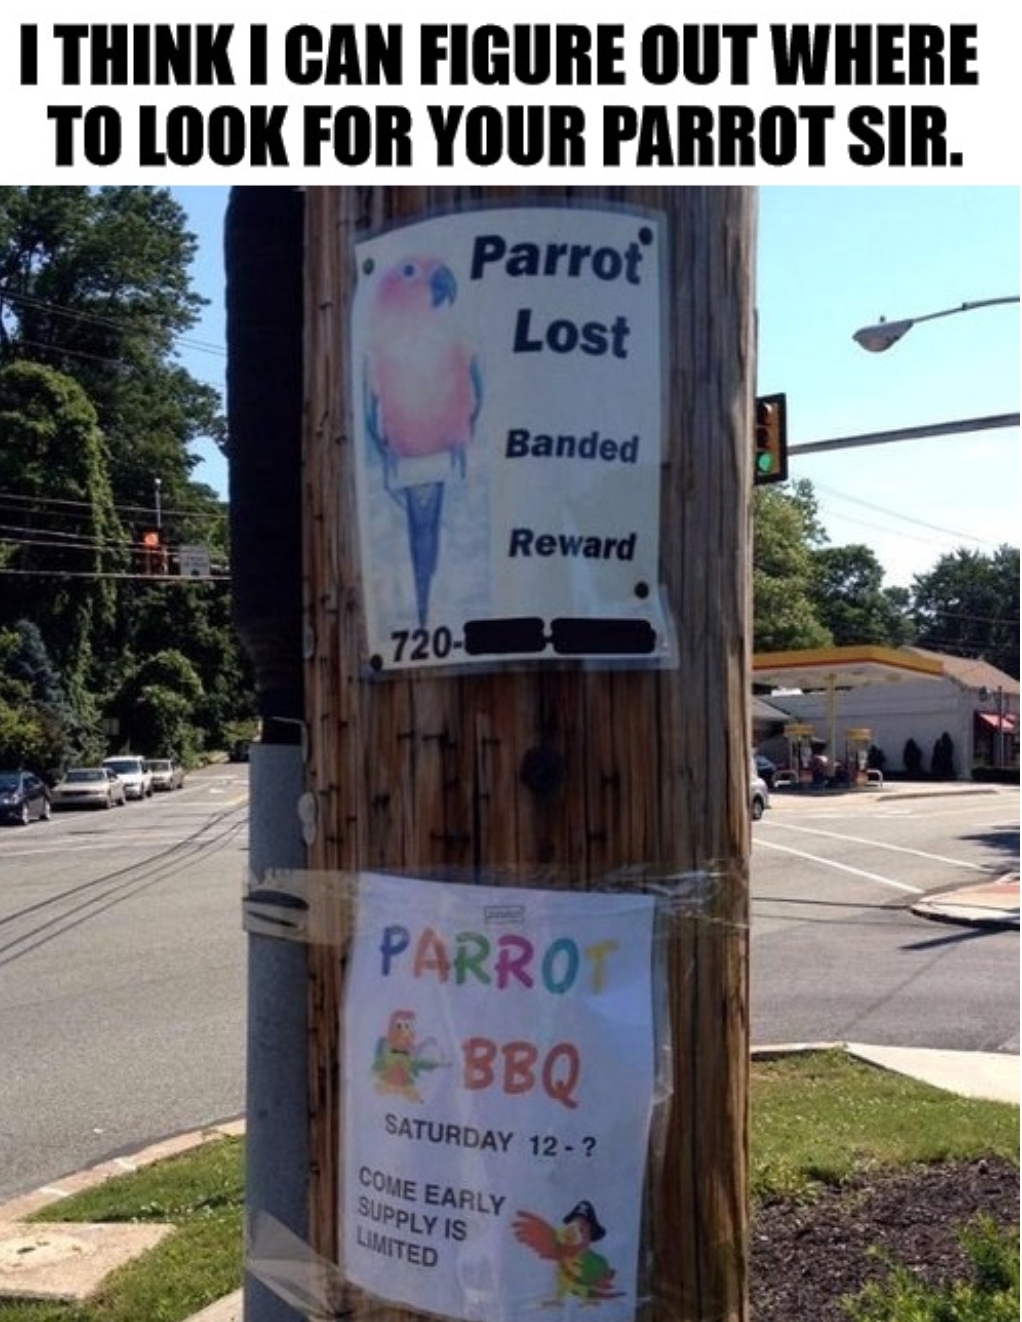 parrot bbq - I Think I Can Figure Out Where To Look For Your Parrot Sir. Parrot Lost Banded Reward 720 Parrot & Bbq Saturday 12? Come Early Supply 1S